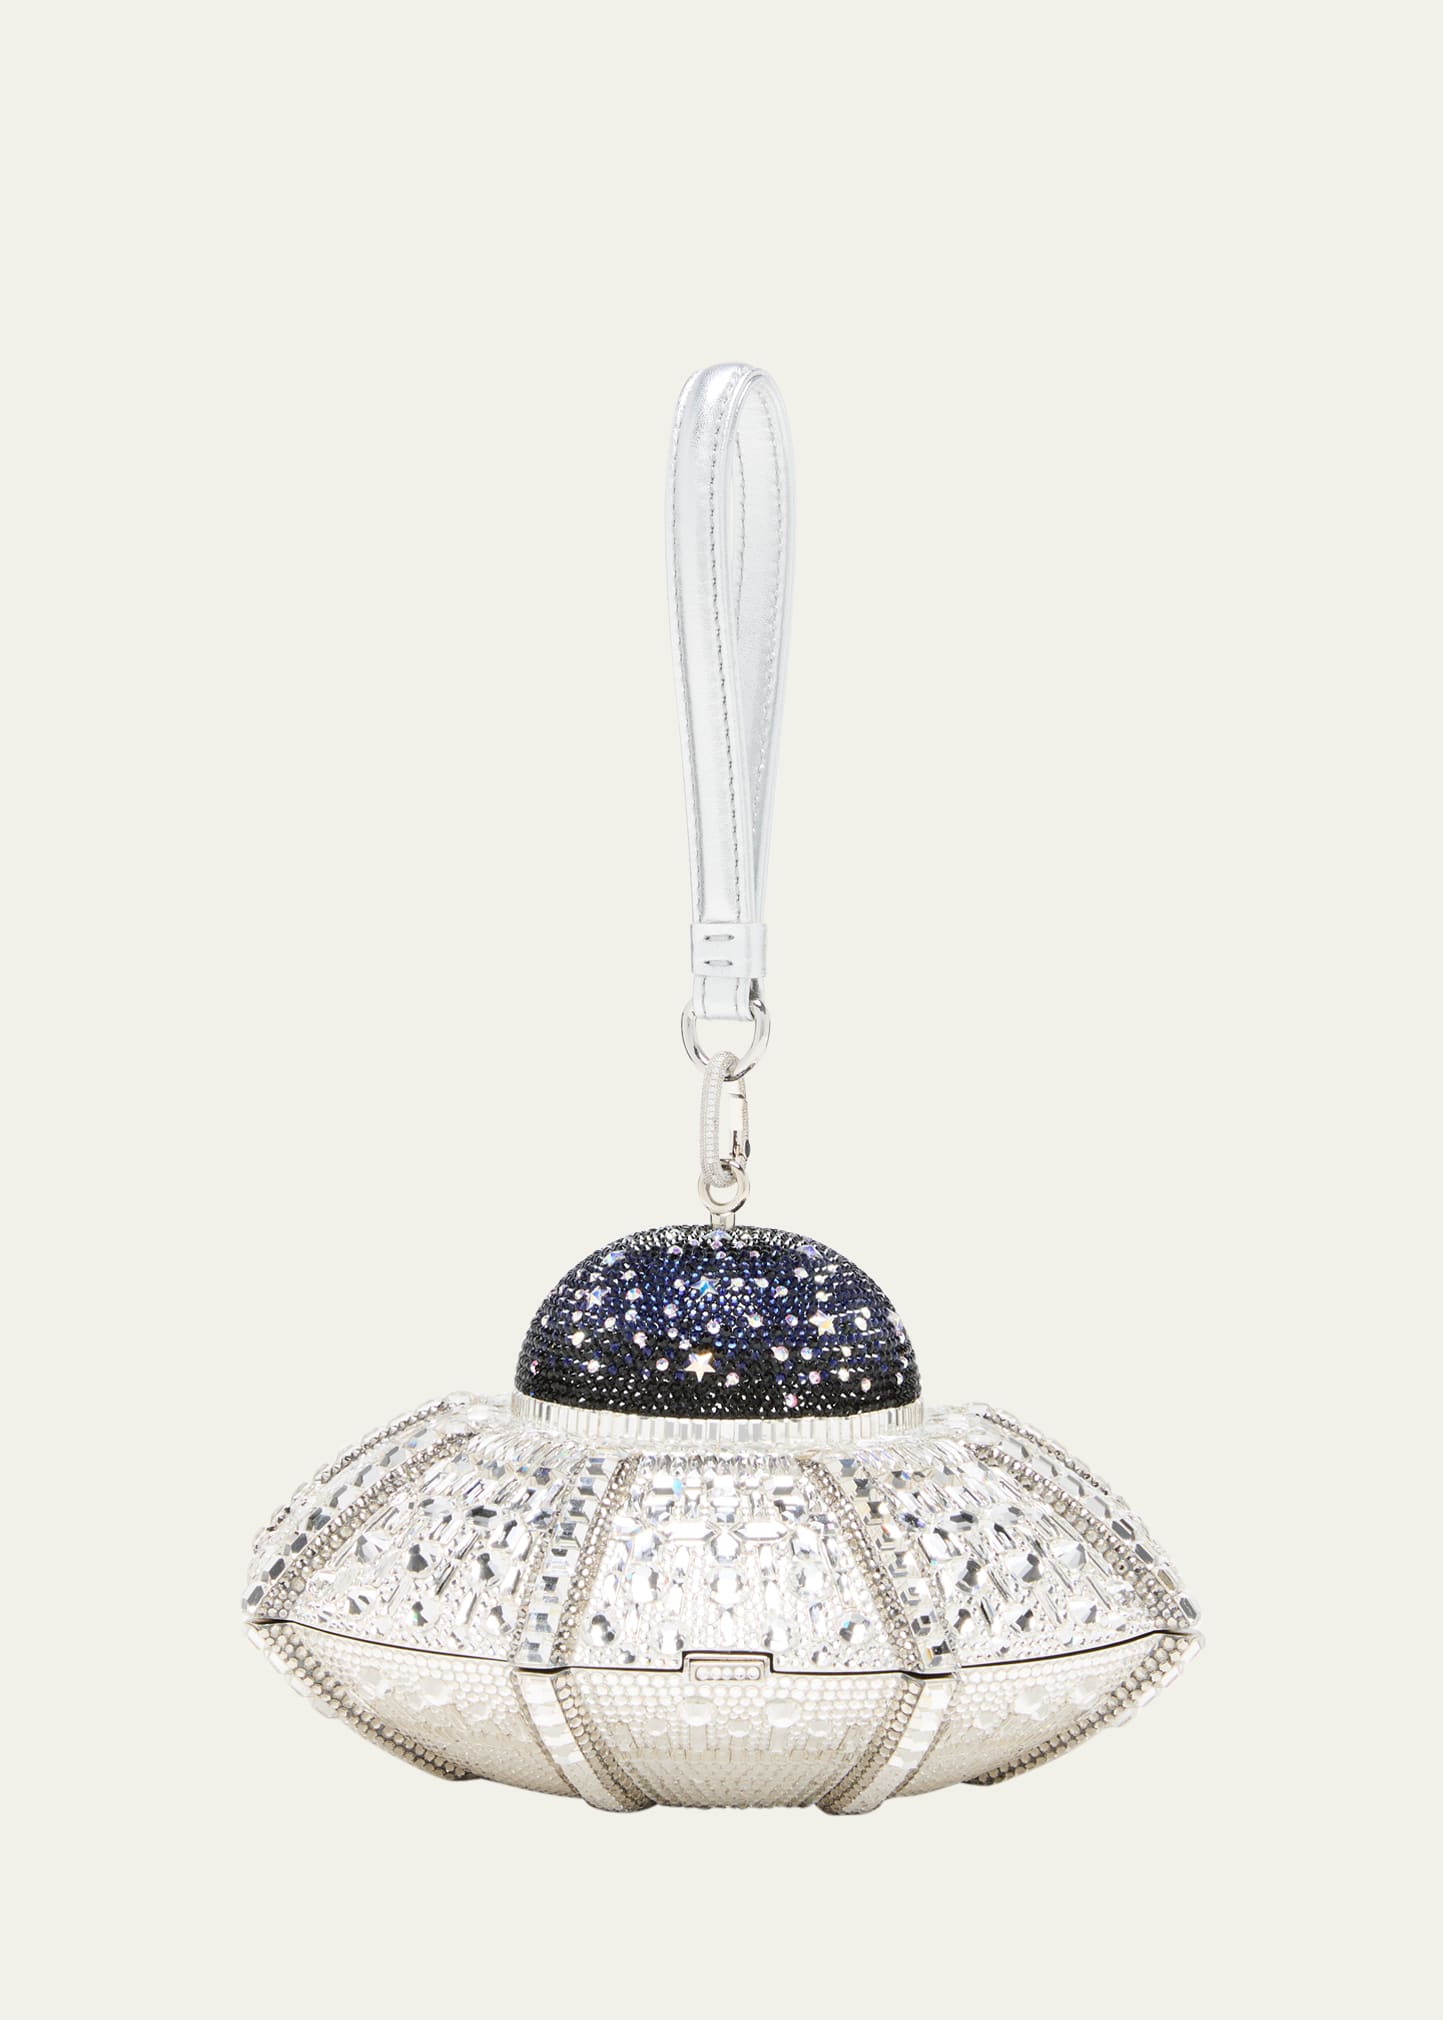 Shop Judith Leiber Ufo Orbiter Clutch Bag With Removable Wristlet Strap In Silver Rhine Mult